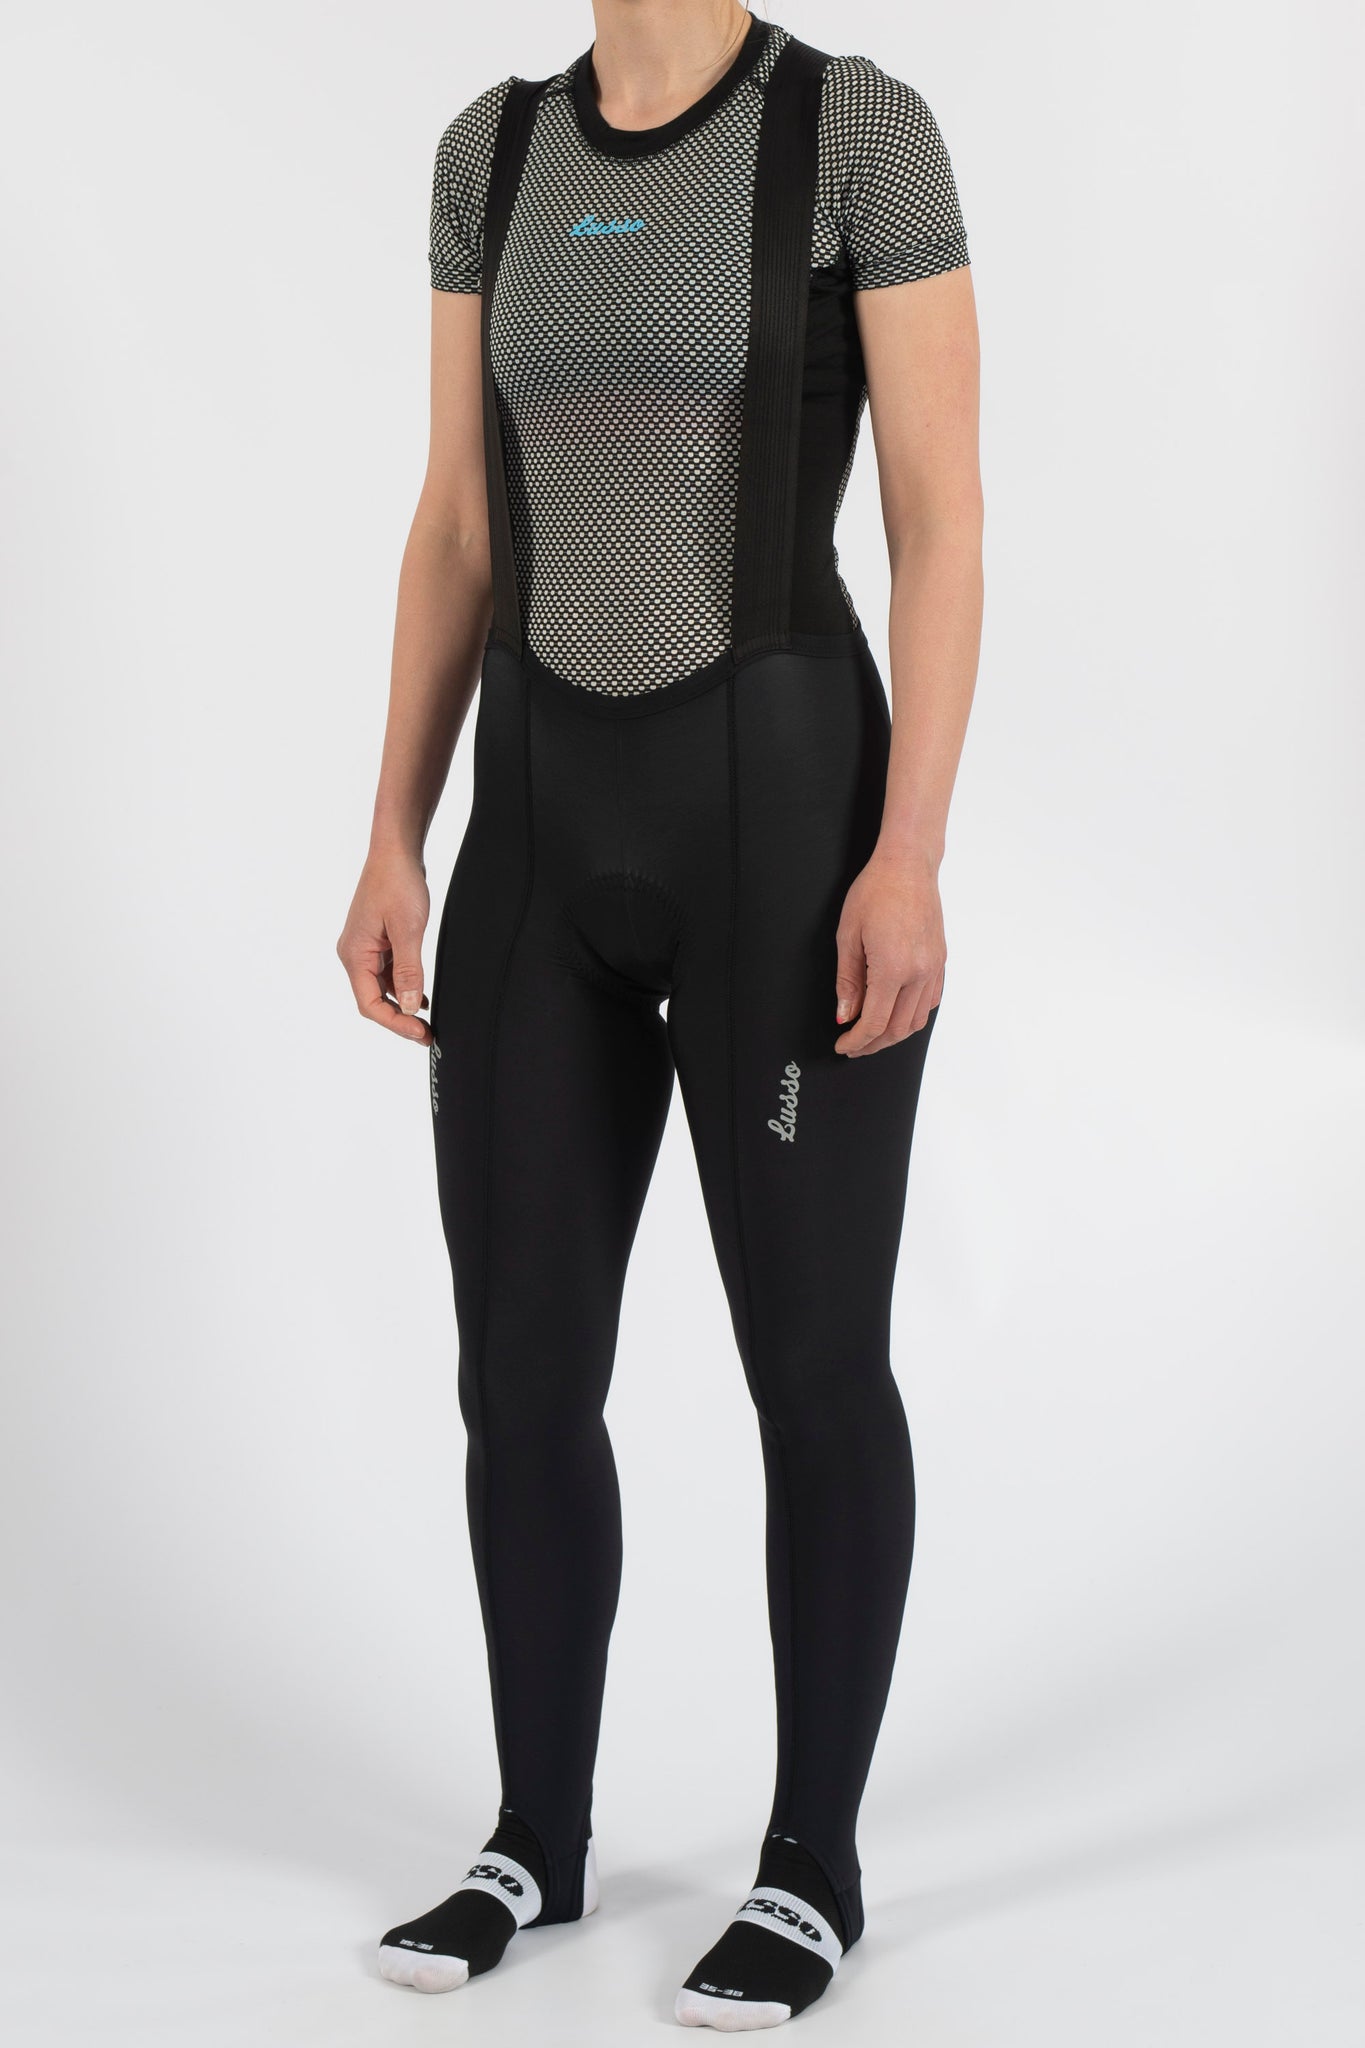 Women's Thermal Bibtights - Lusso Cycle Wear